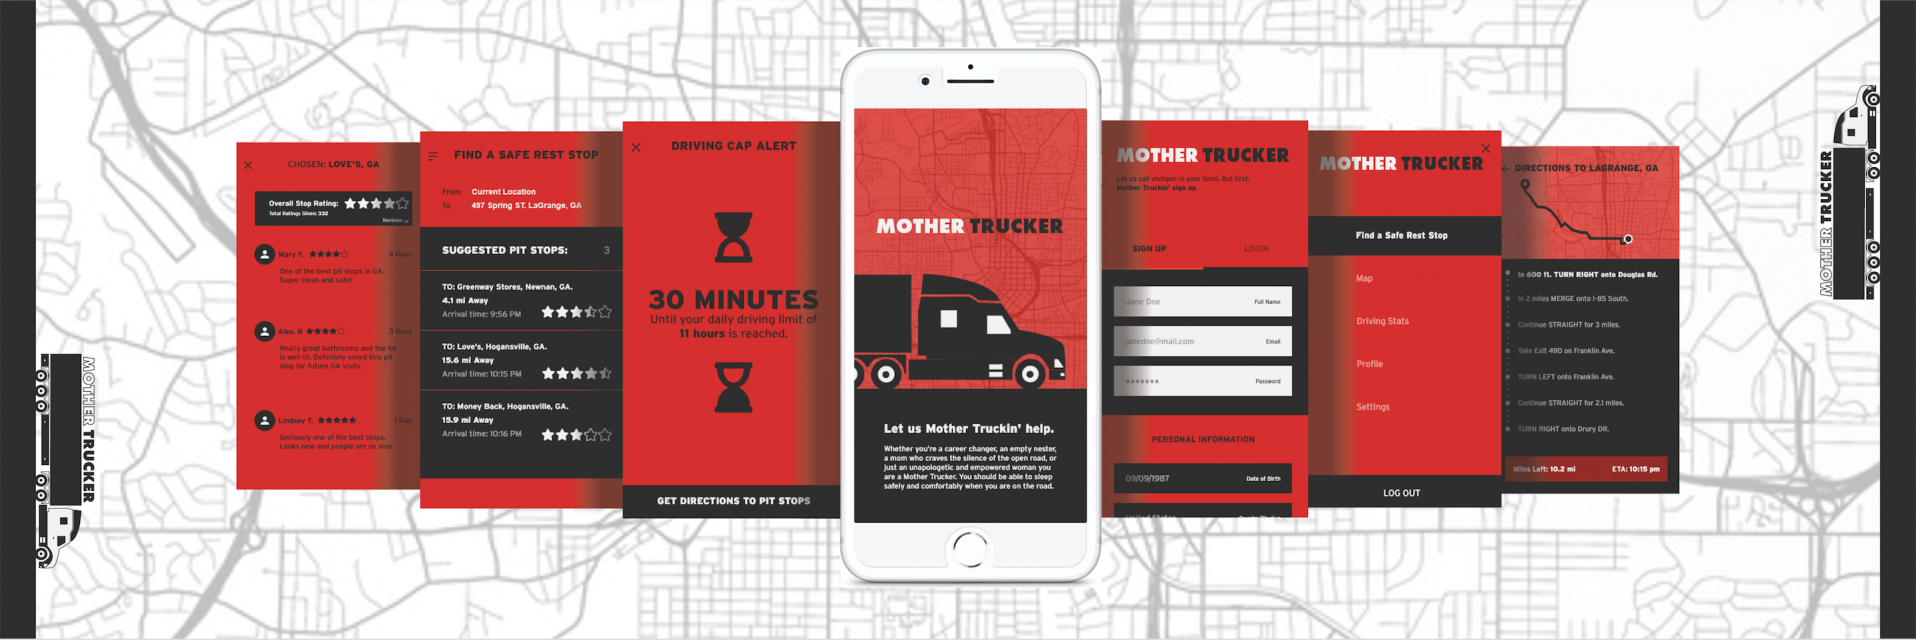 Images from different parts of the Mother Trucker app